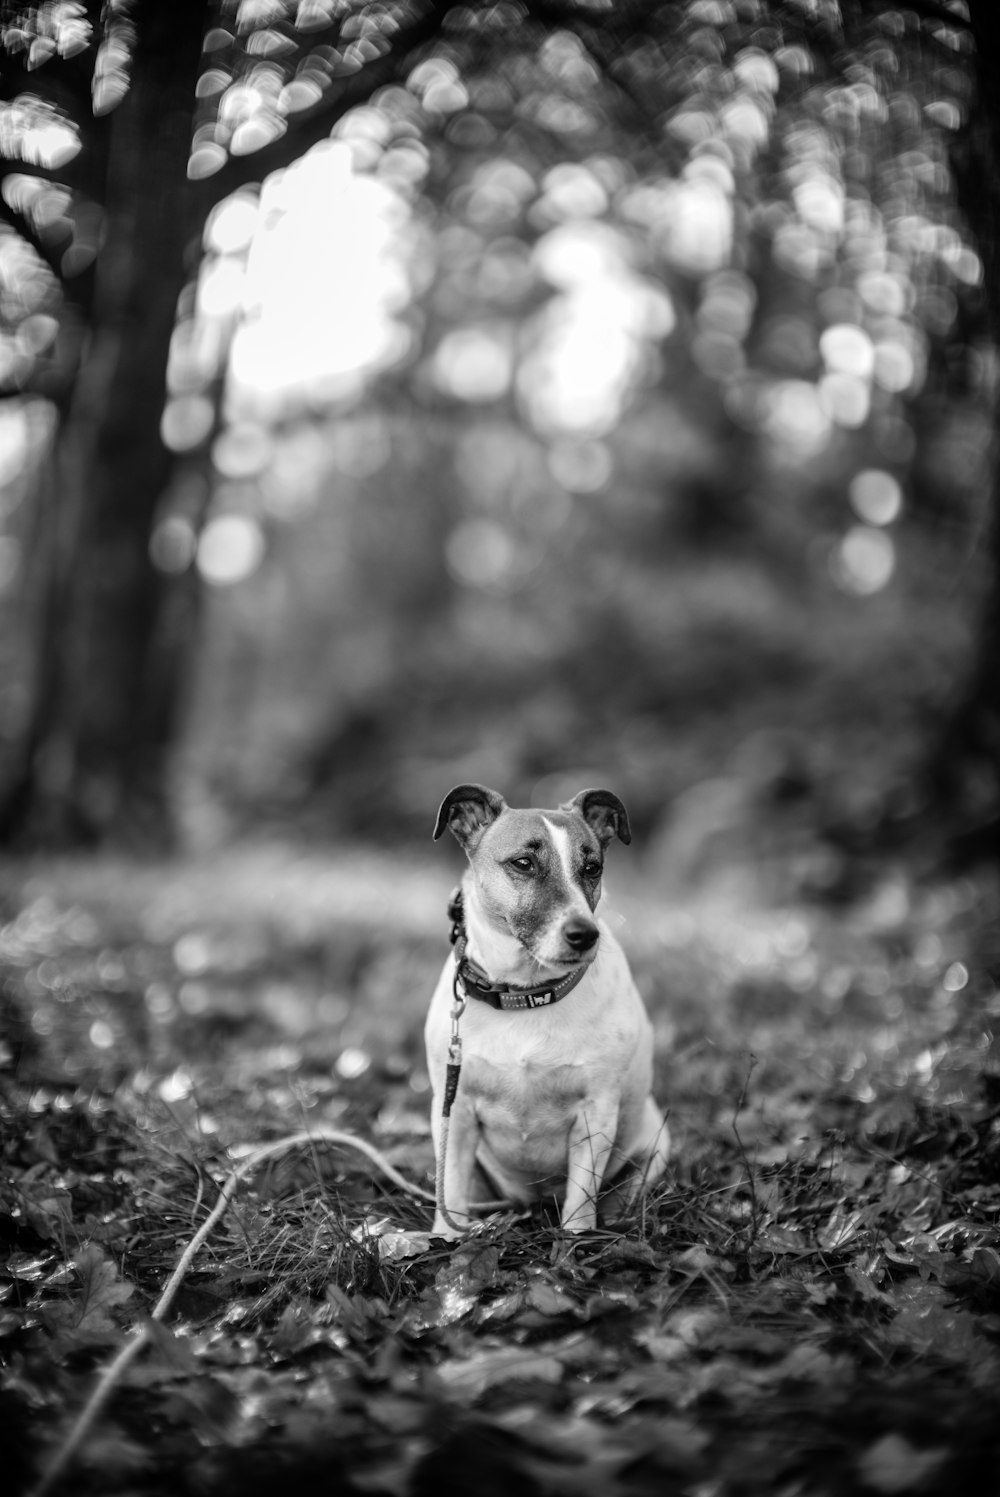 grayscale photo of short coated dog sitting on grass field